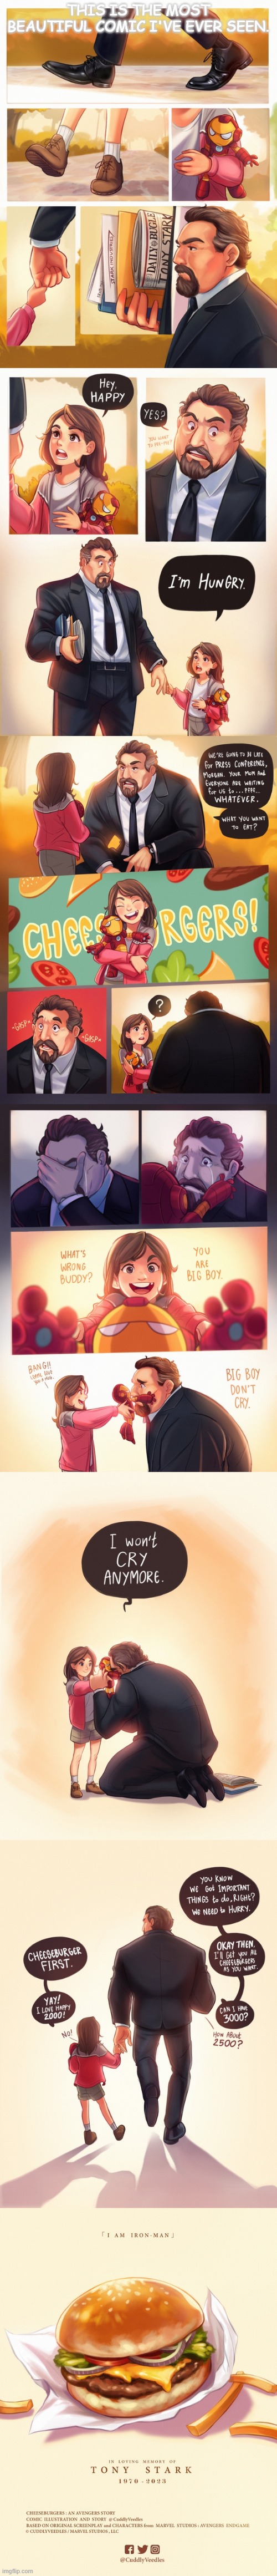 In loving memory of Tony Stark, the Iron Man | THIS IS THE MOST BEAUTIFUL COMIC I'VE EVER SEEN. | made w/ Imgflip meme maker